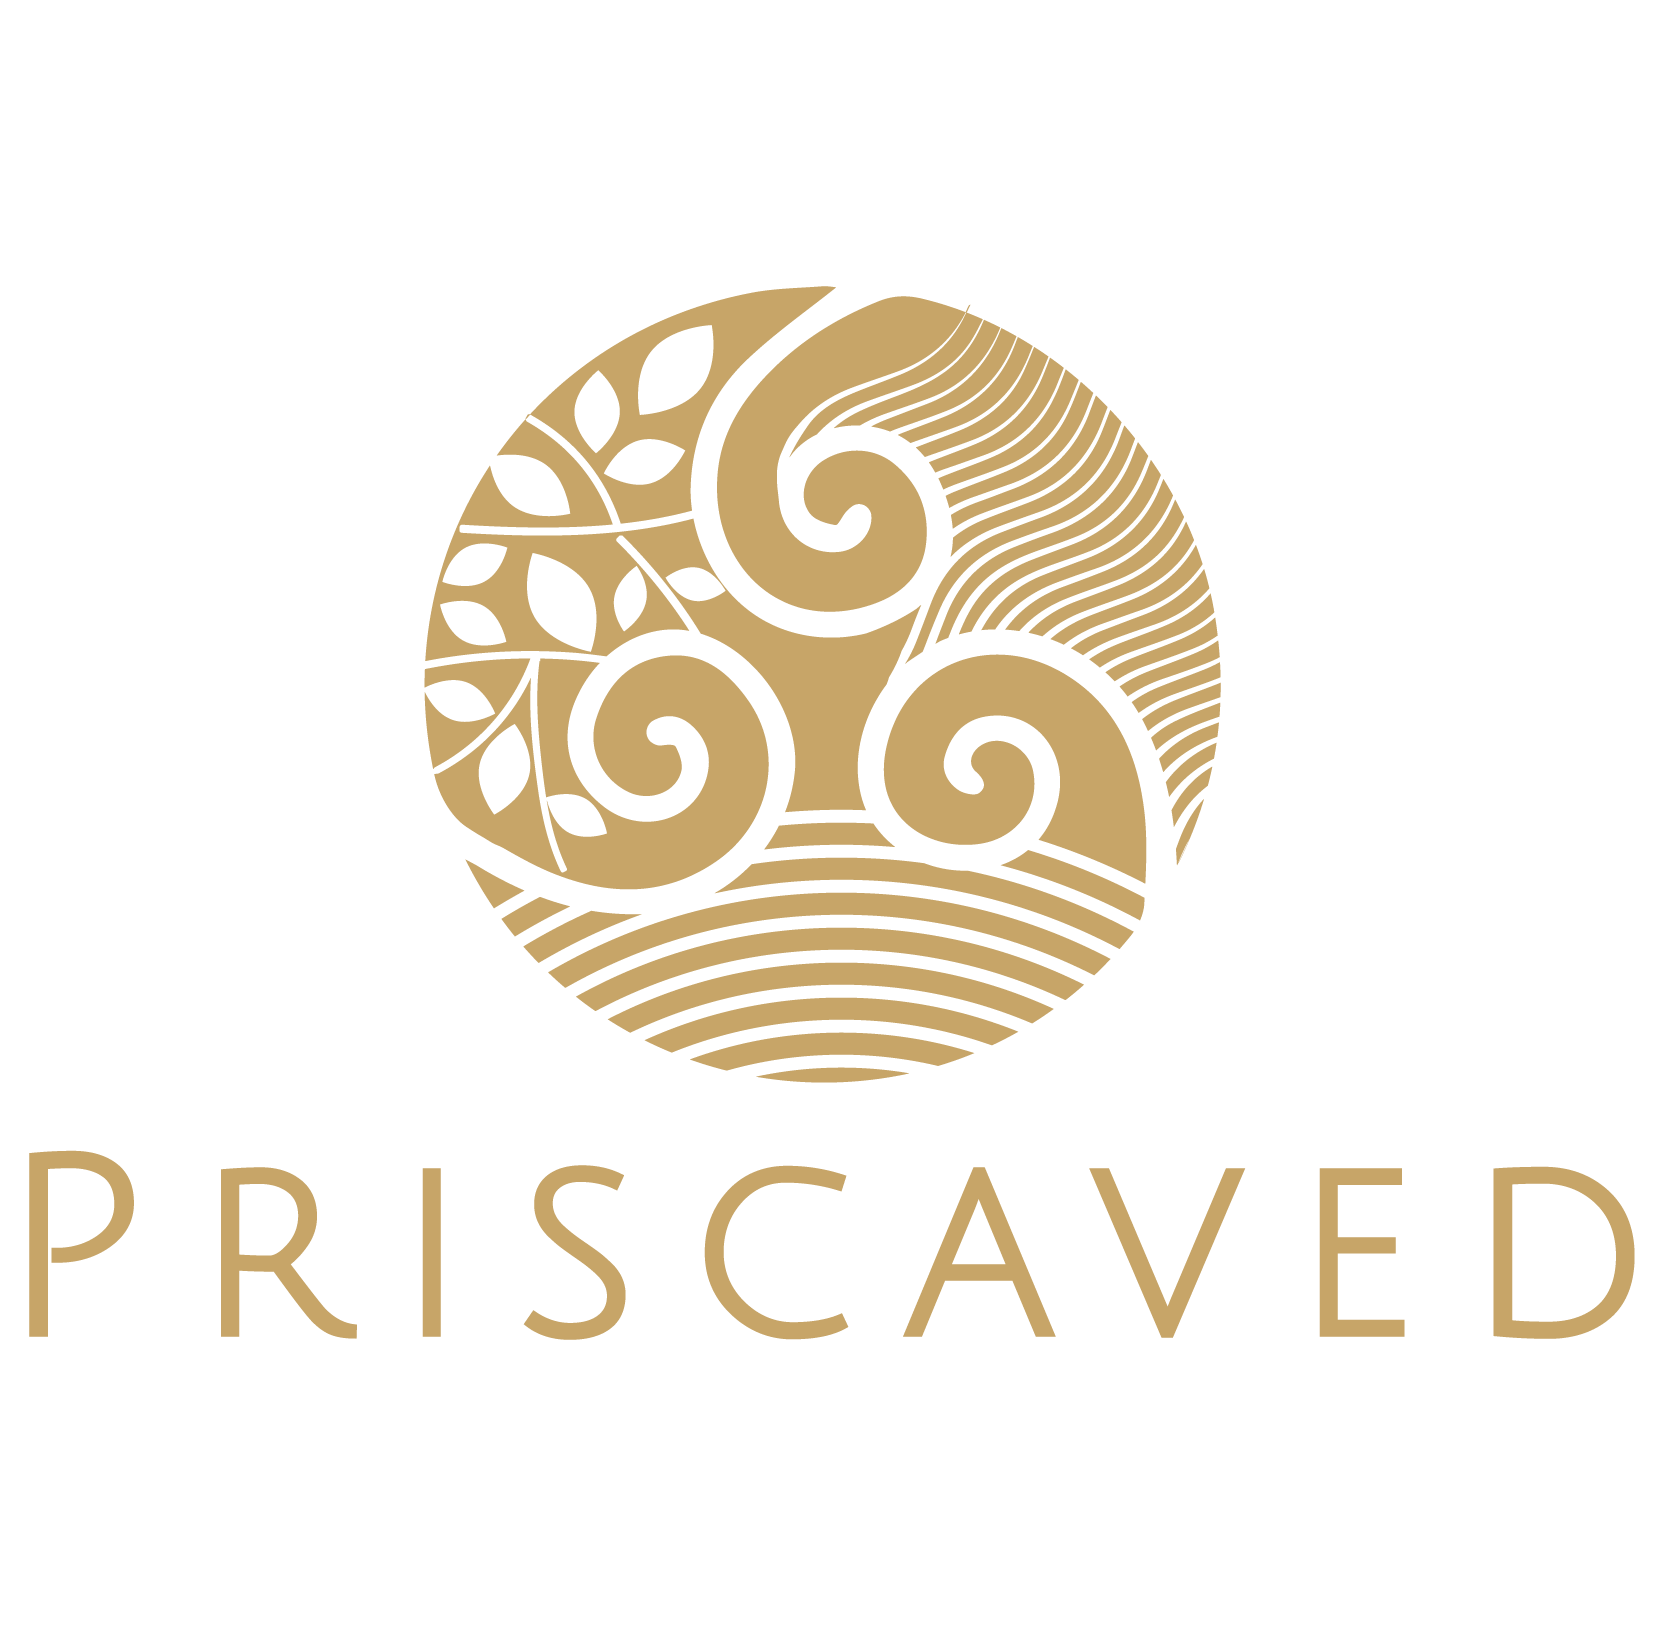 Priscaved